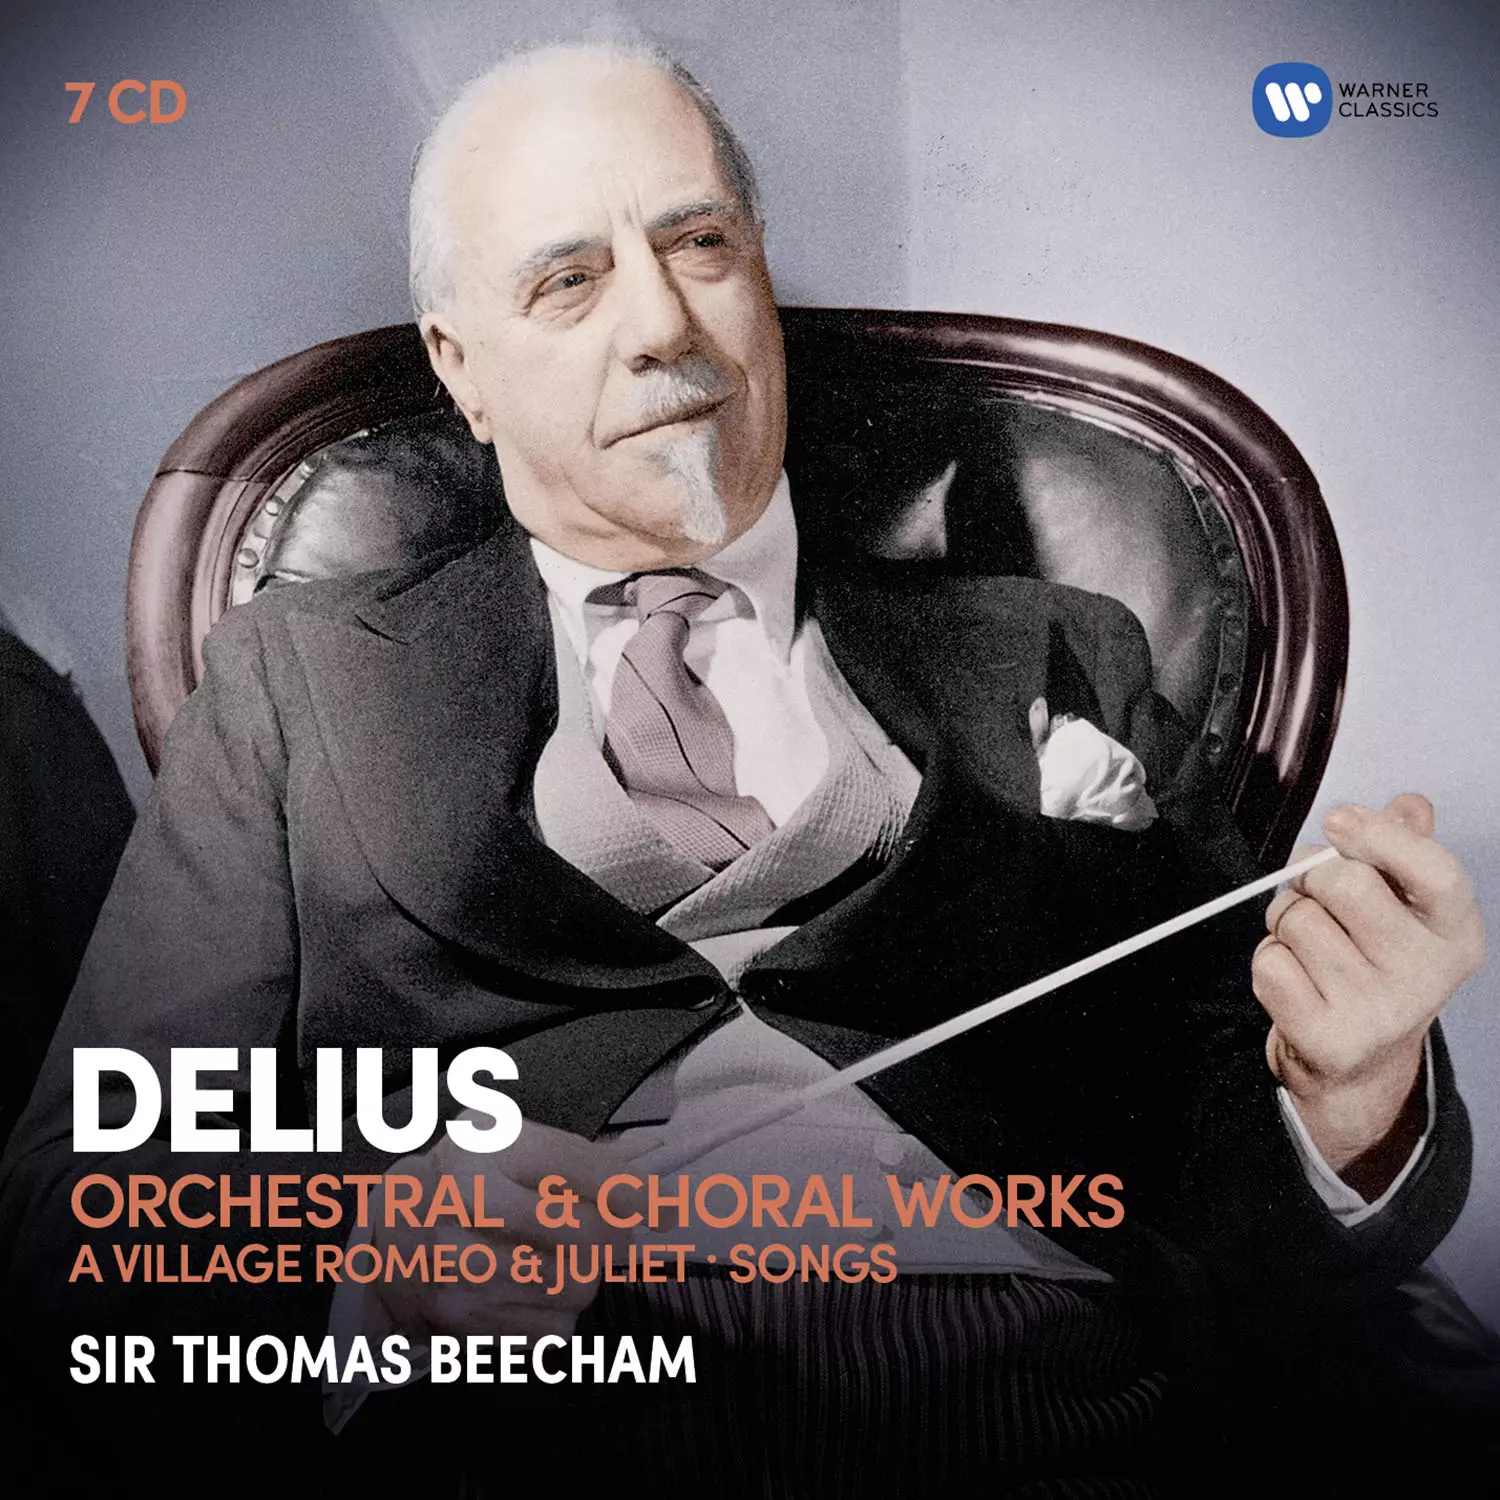 Delius: Orchestral & Choral Works